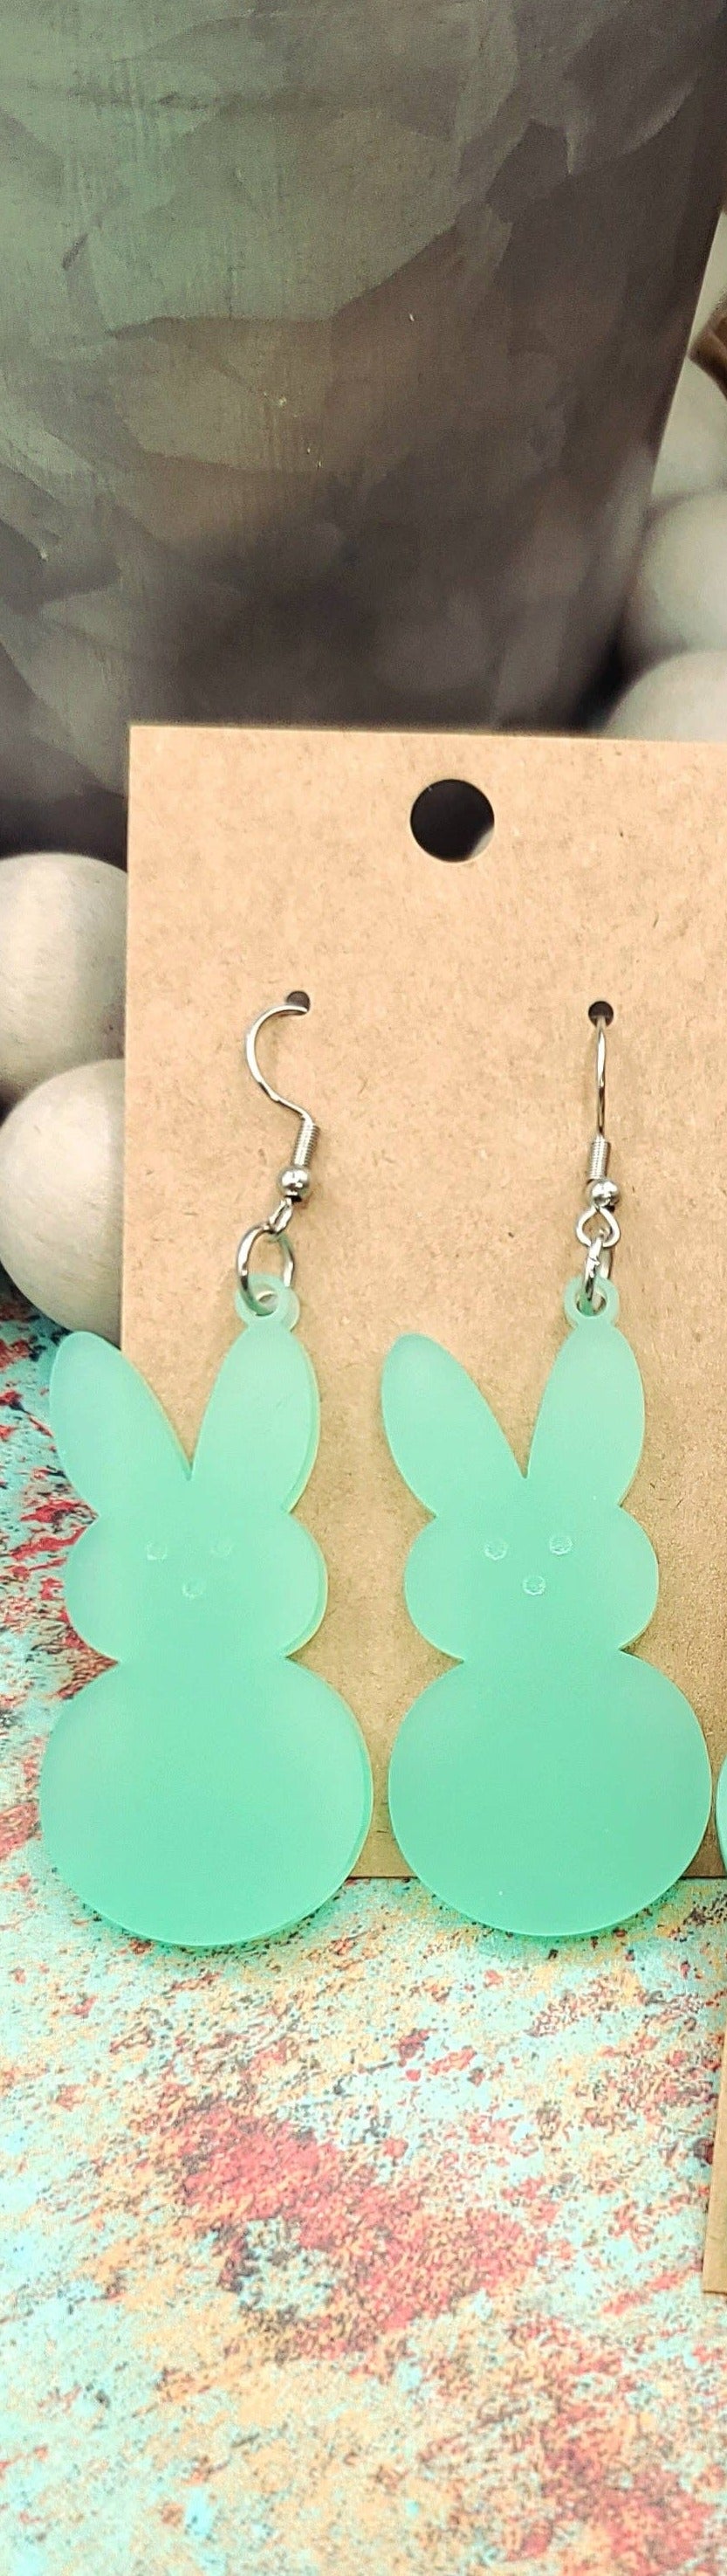 Frosted Mint Bunny EarringsPink tiful of LOVE